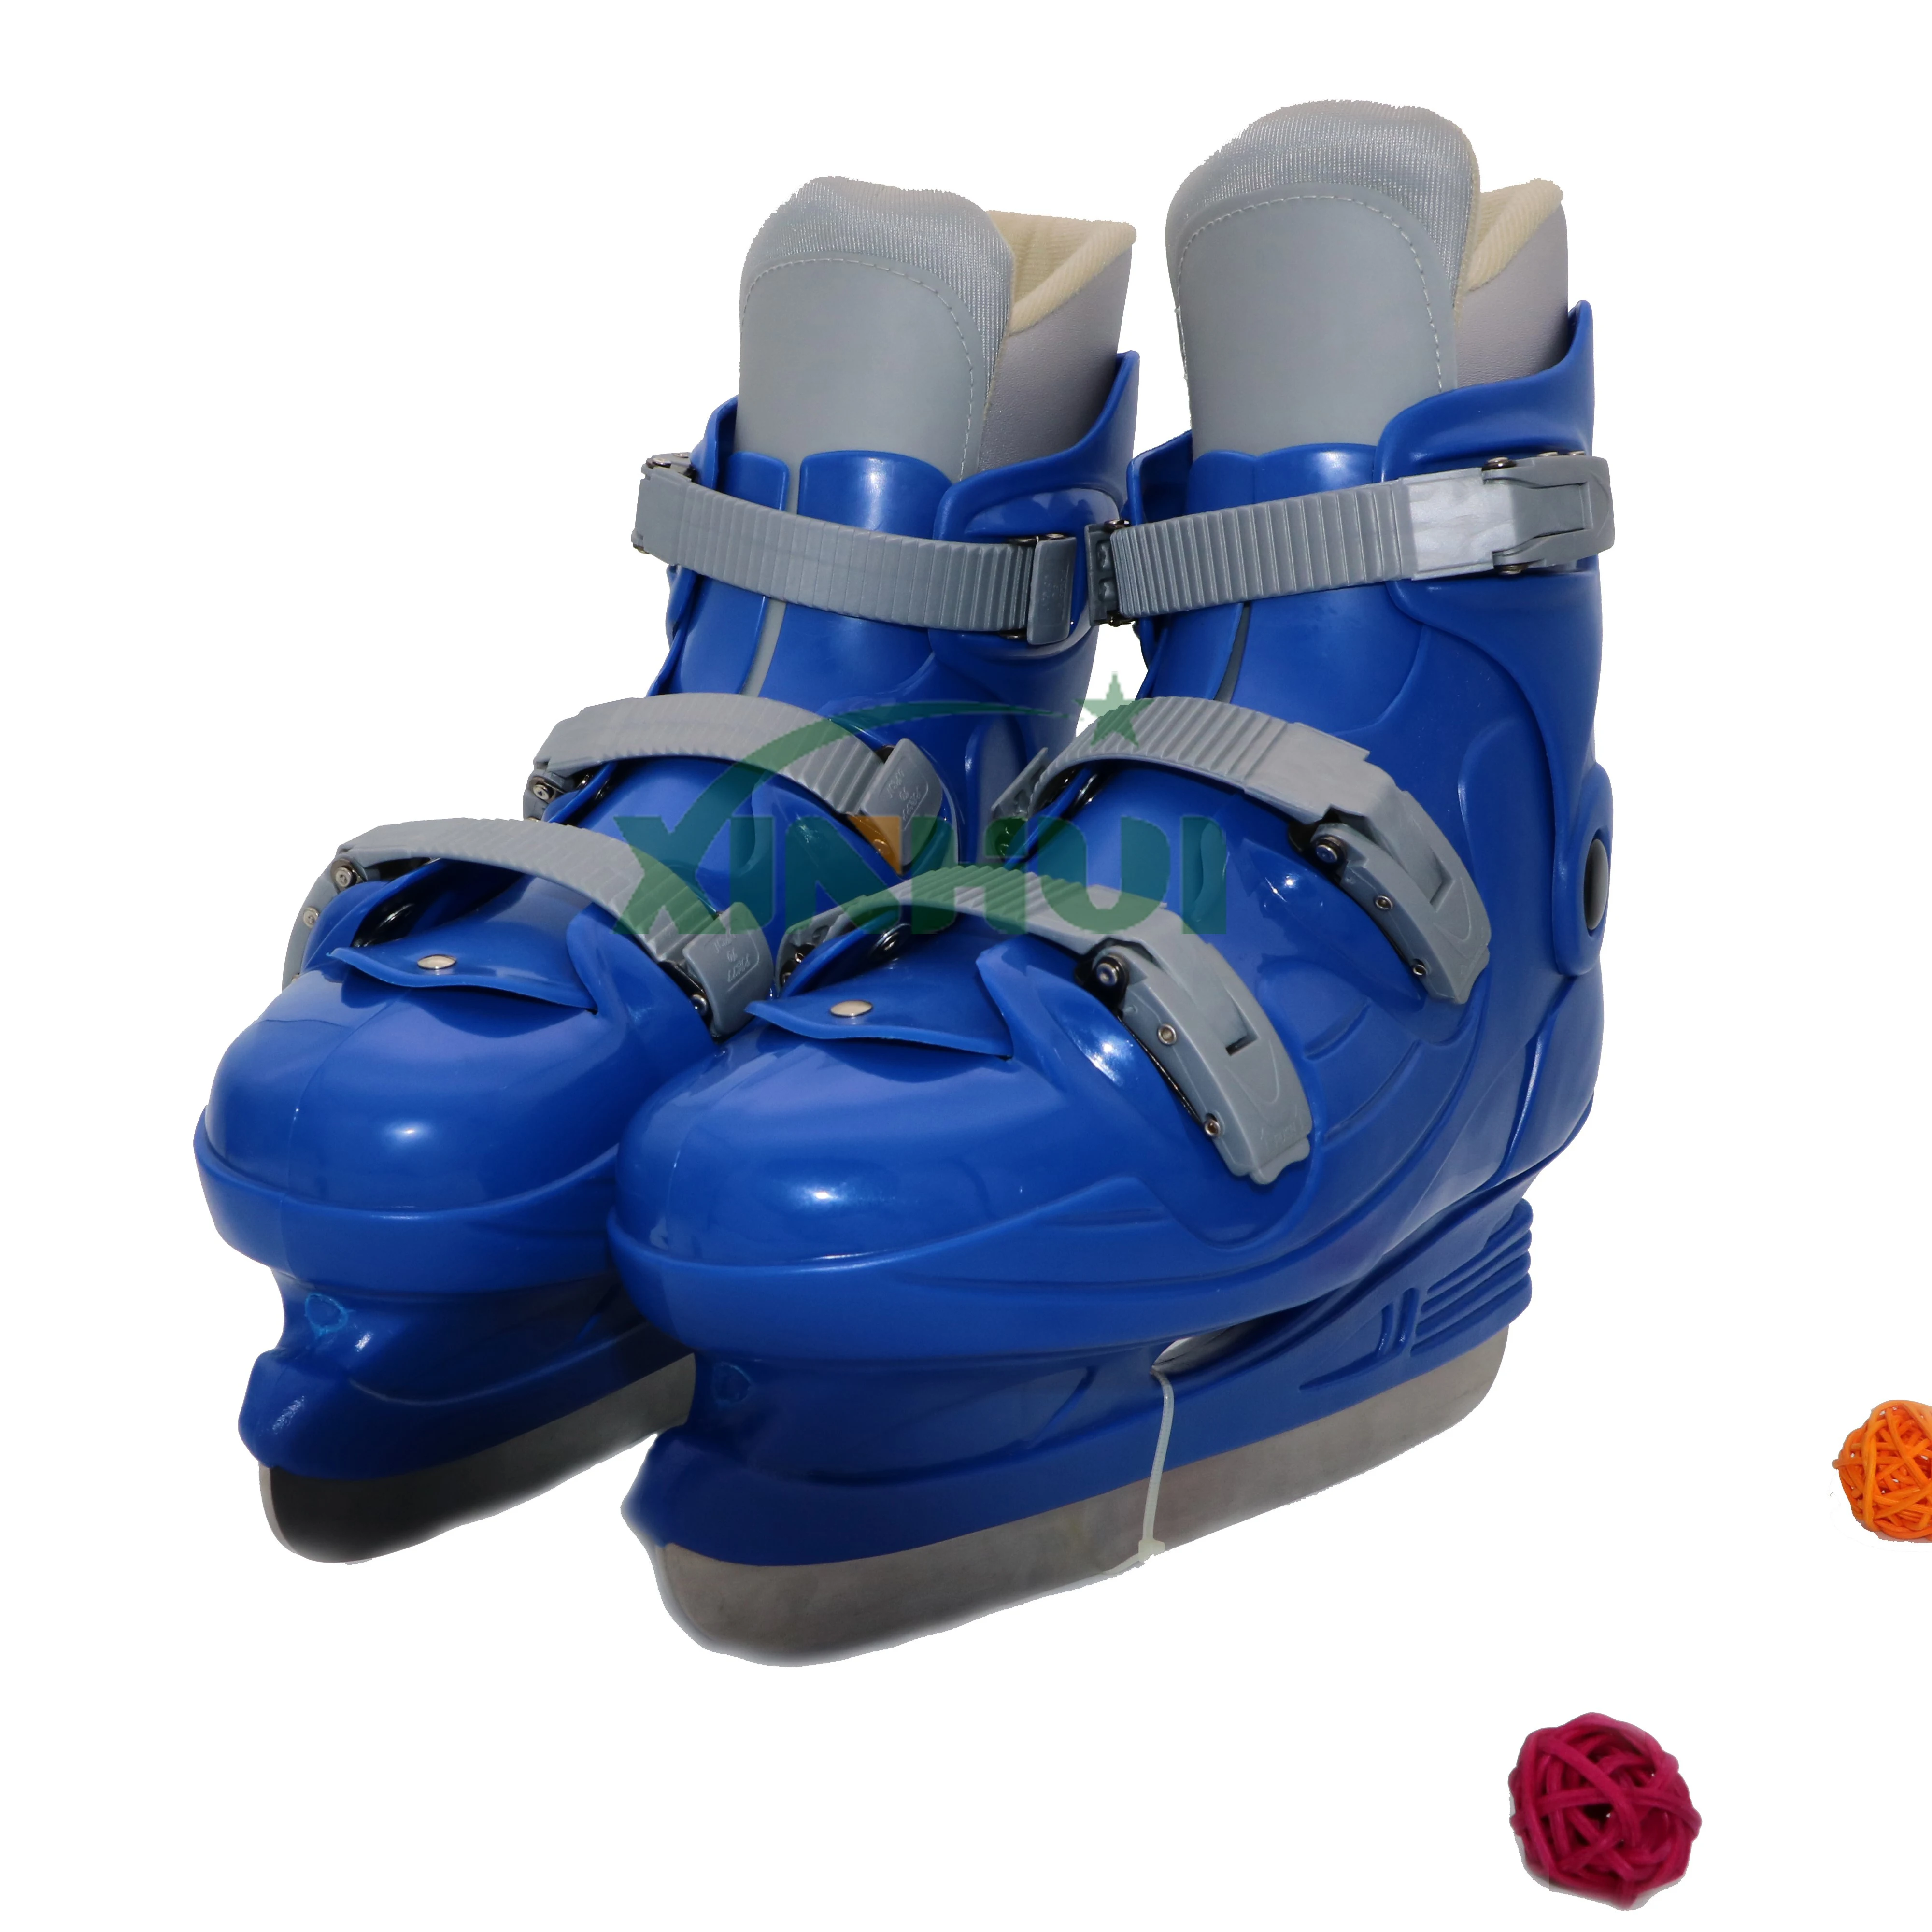 
Premium Adjustable Ice Skates for Girls and Boys, Awesome BlueColor, Super Comfortable Padding and Reinforced Ankle Support 